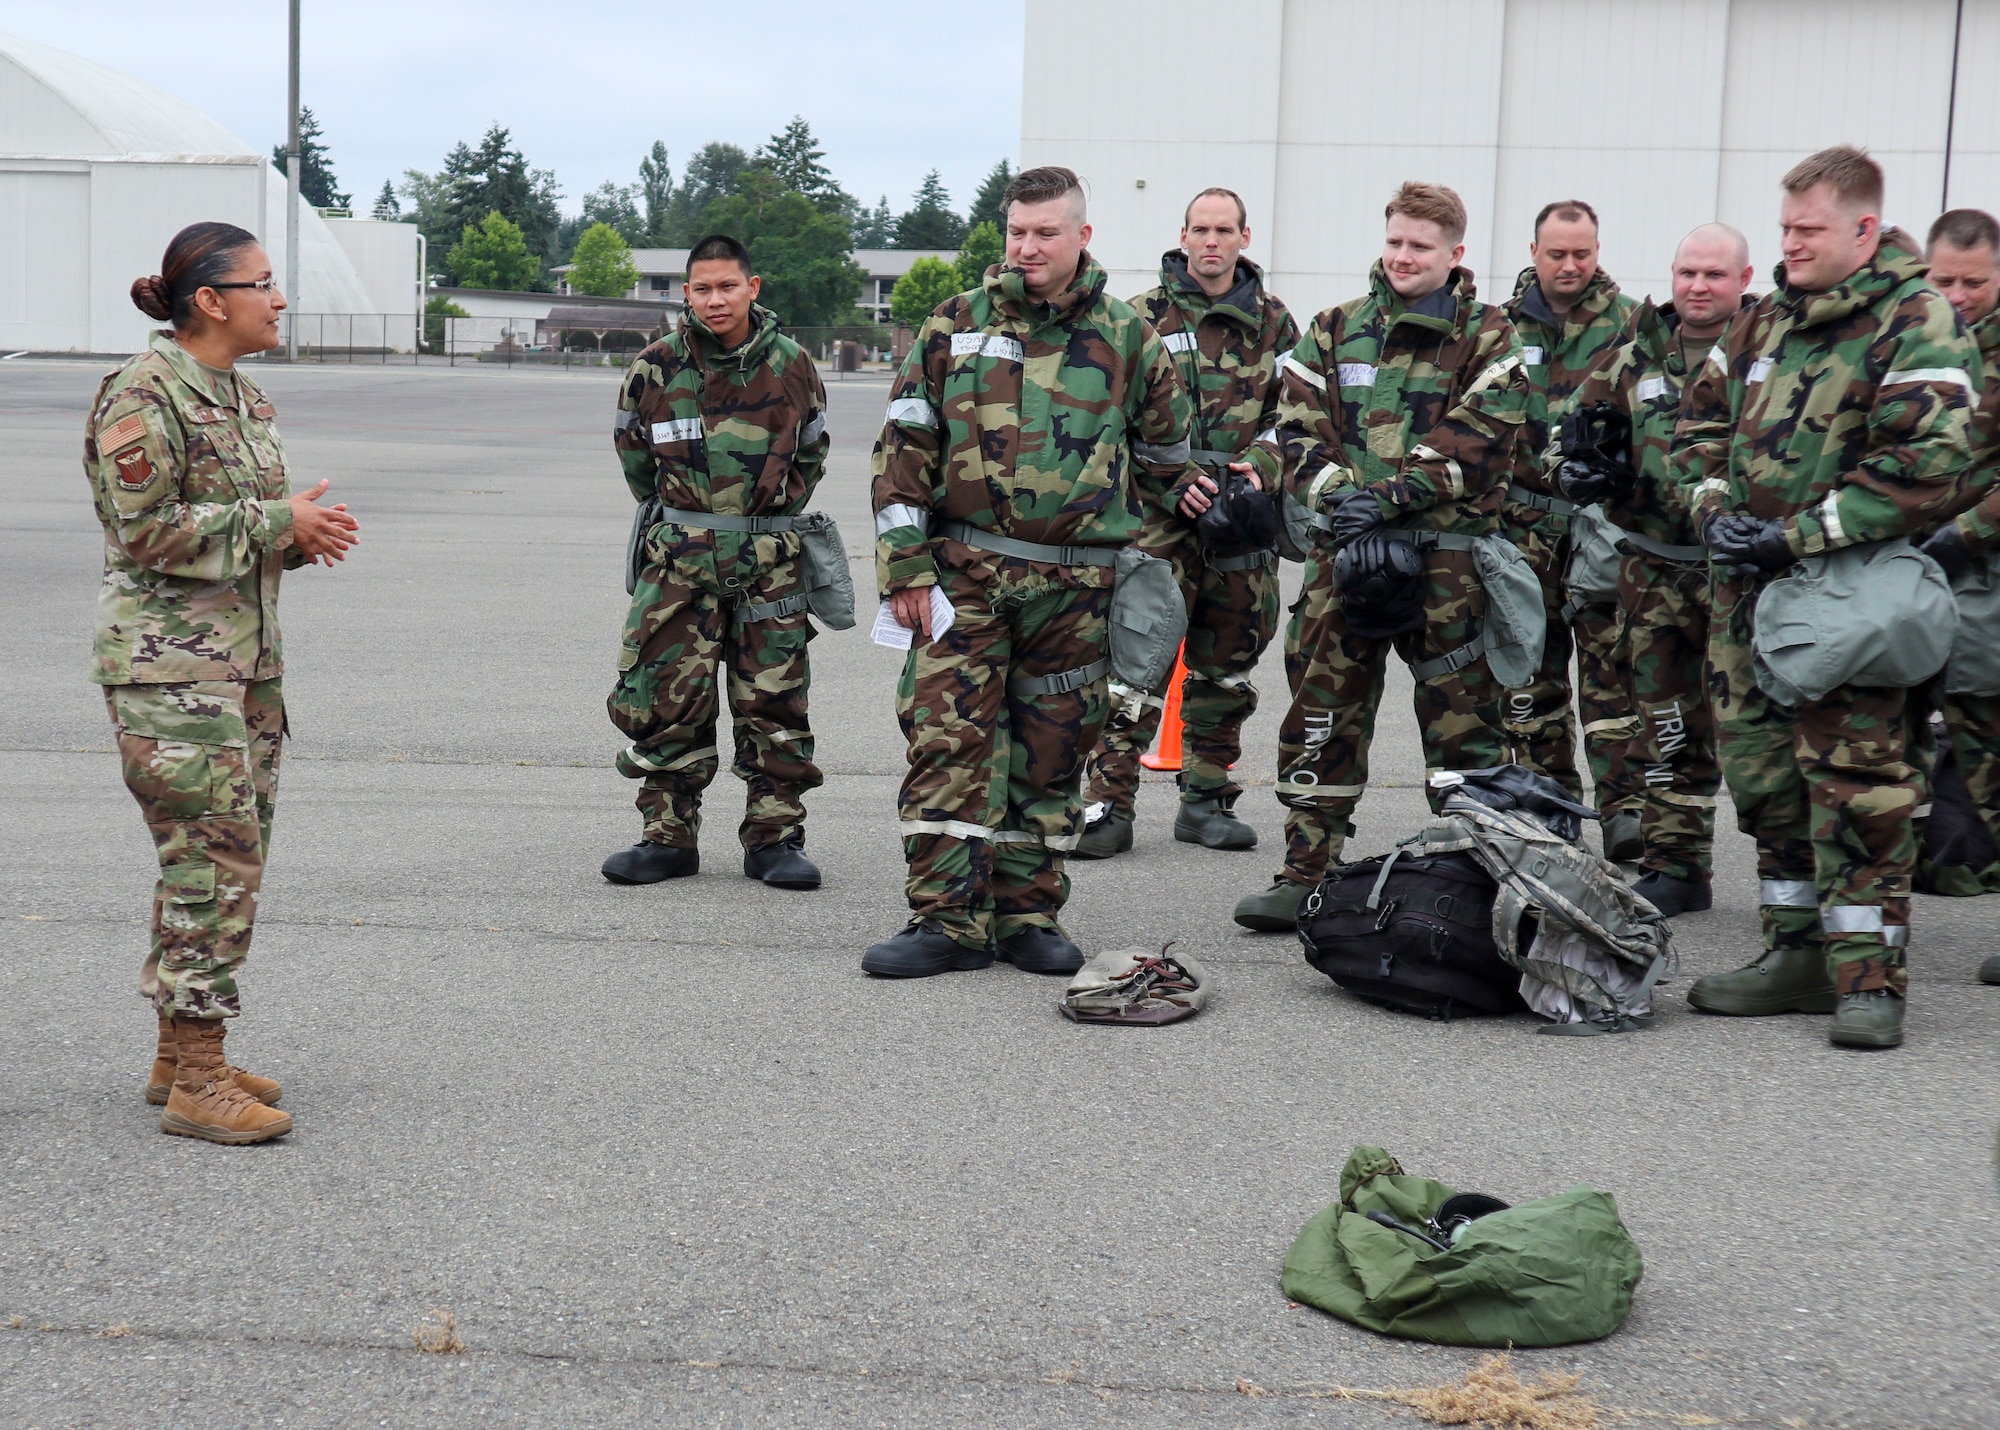 4th AF Command Chief speaks with Airmen in MOPP gear following an exercise.